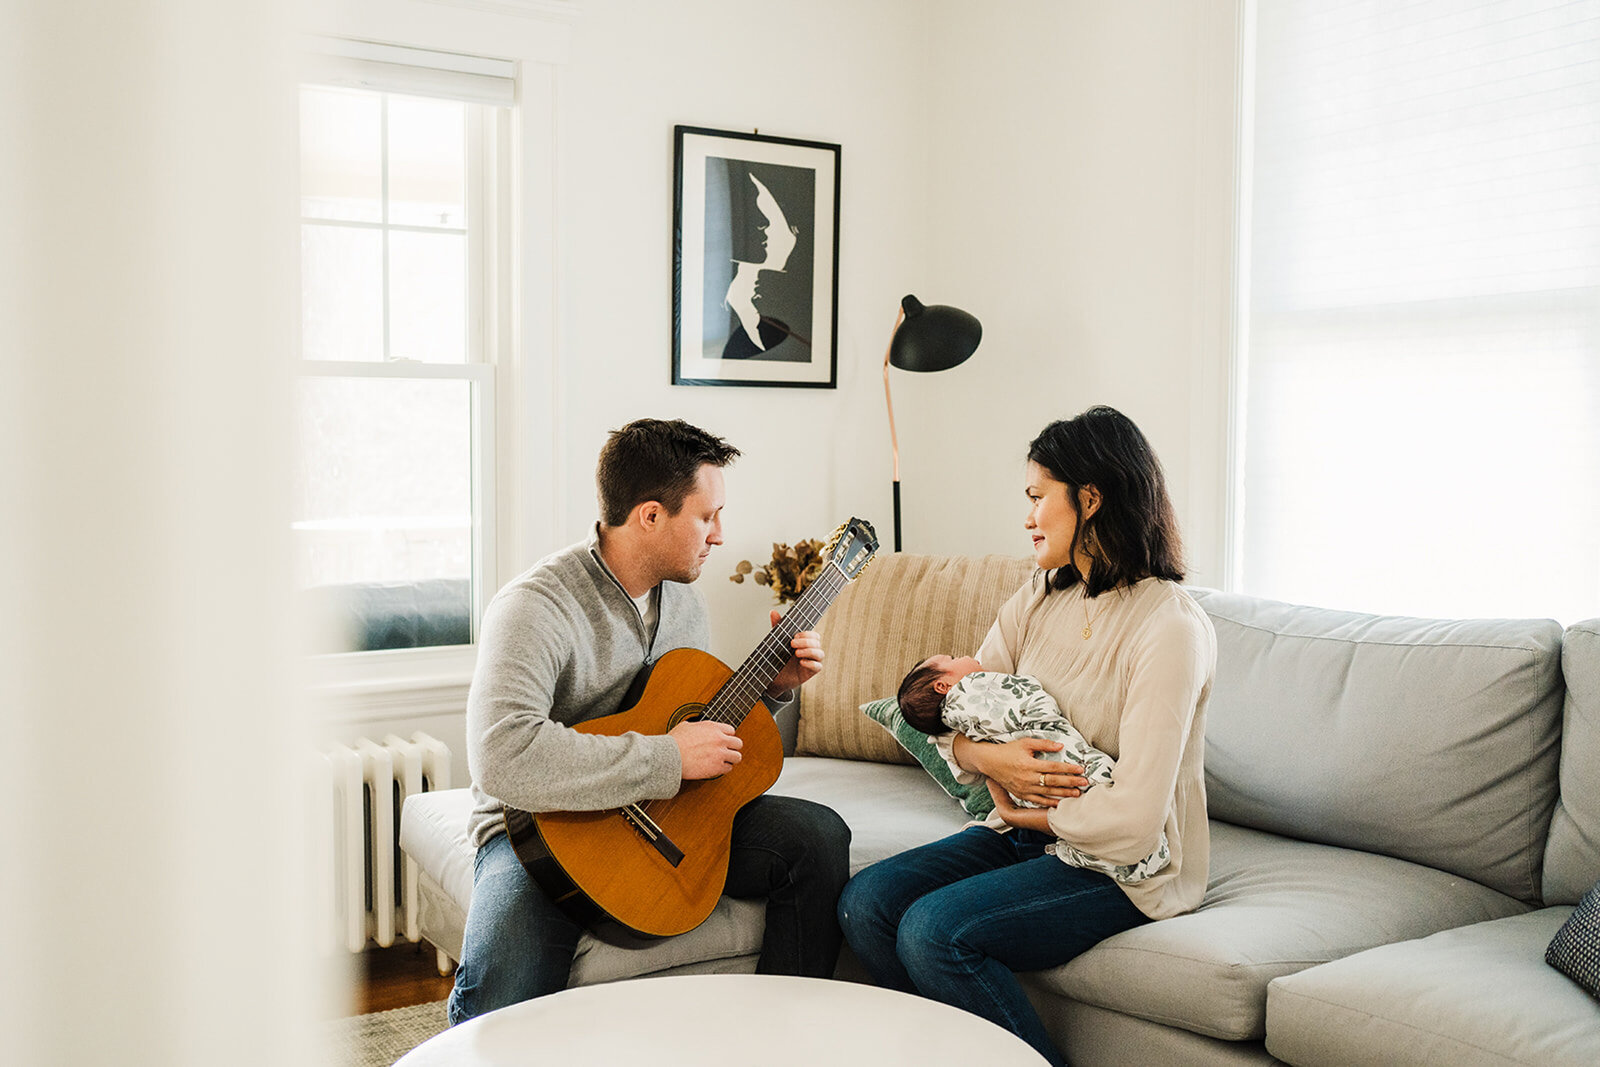 dad plays guitar to newborn baby in living room